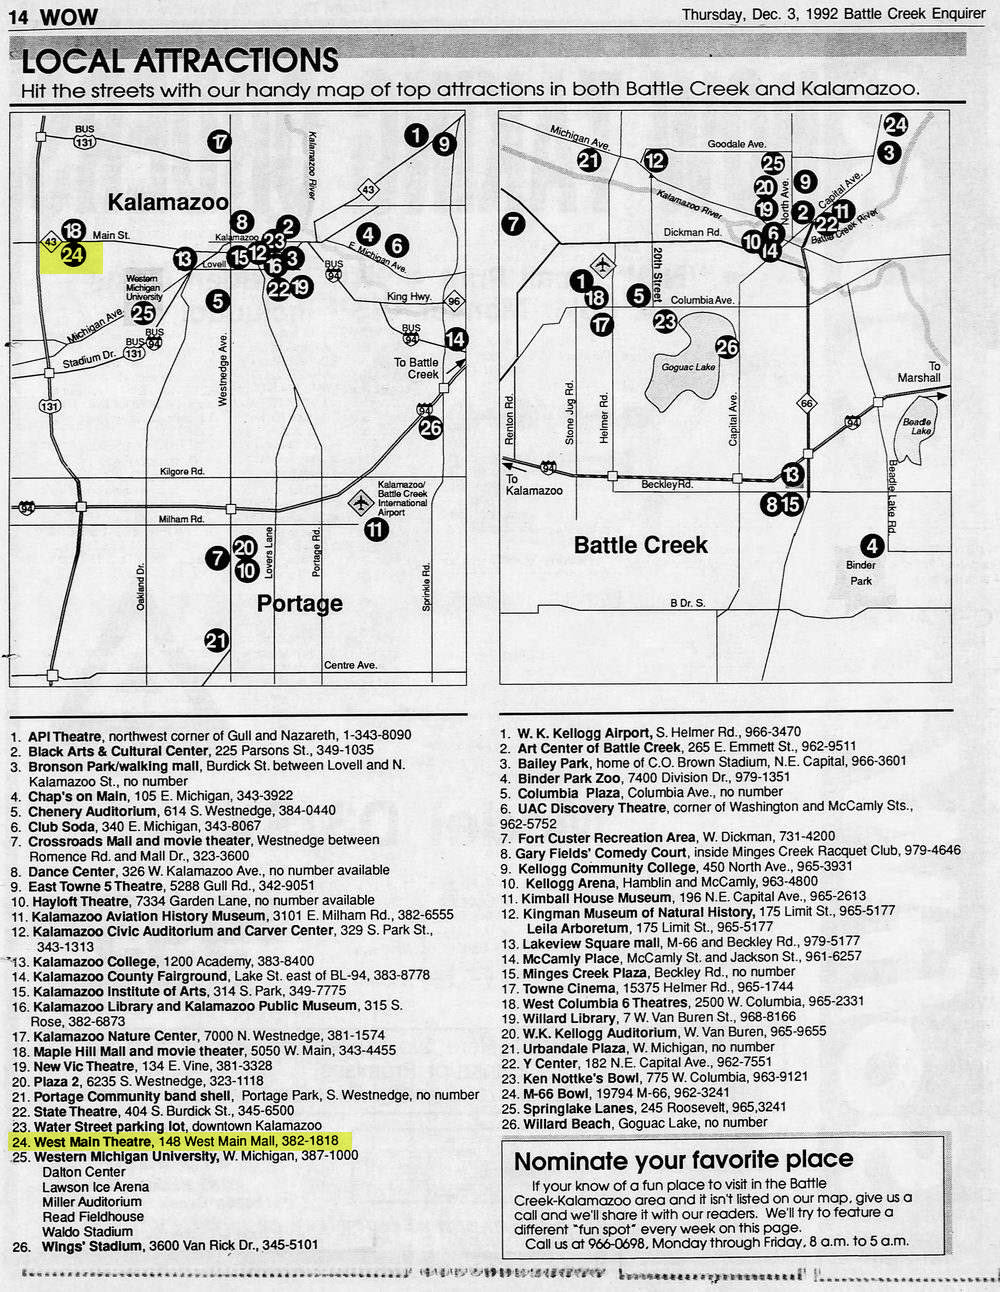 Movies at West Main - 1992 LOCAL ATTRACTION GUIDE (newer photo)